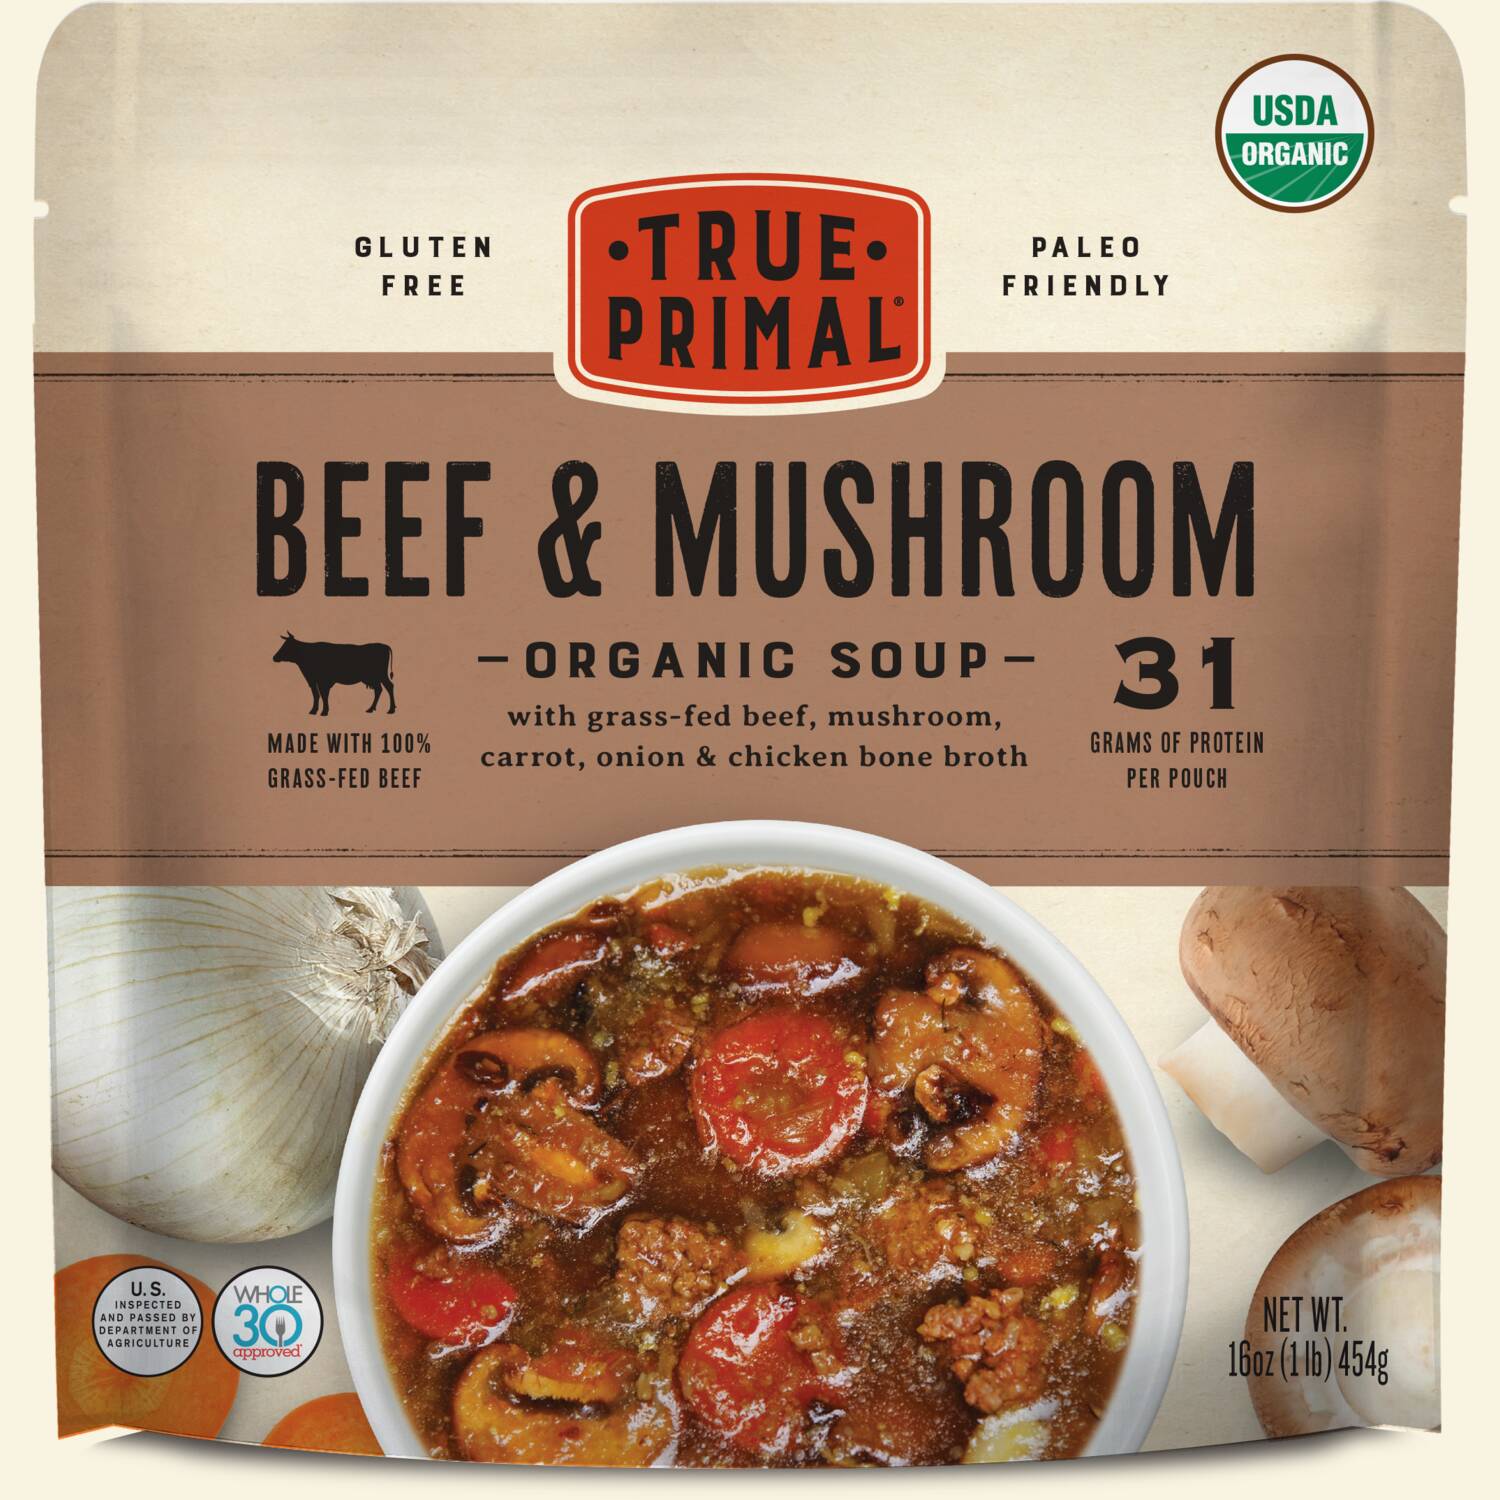 True Primal Beef and Mushroom Organic Soup in pouch, front